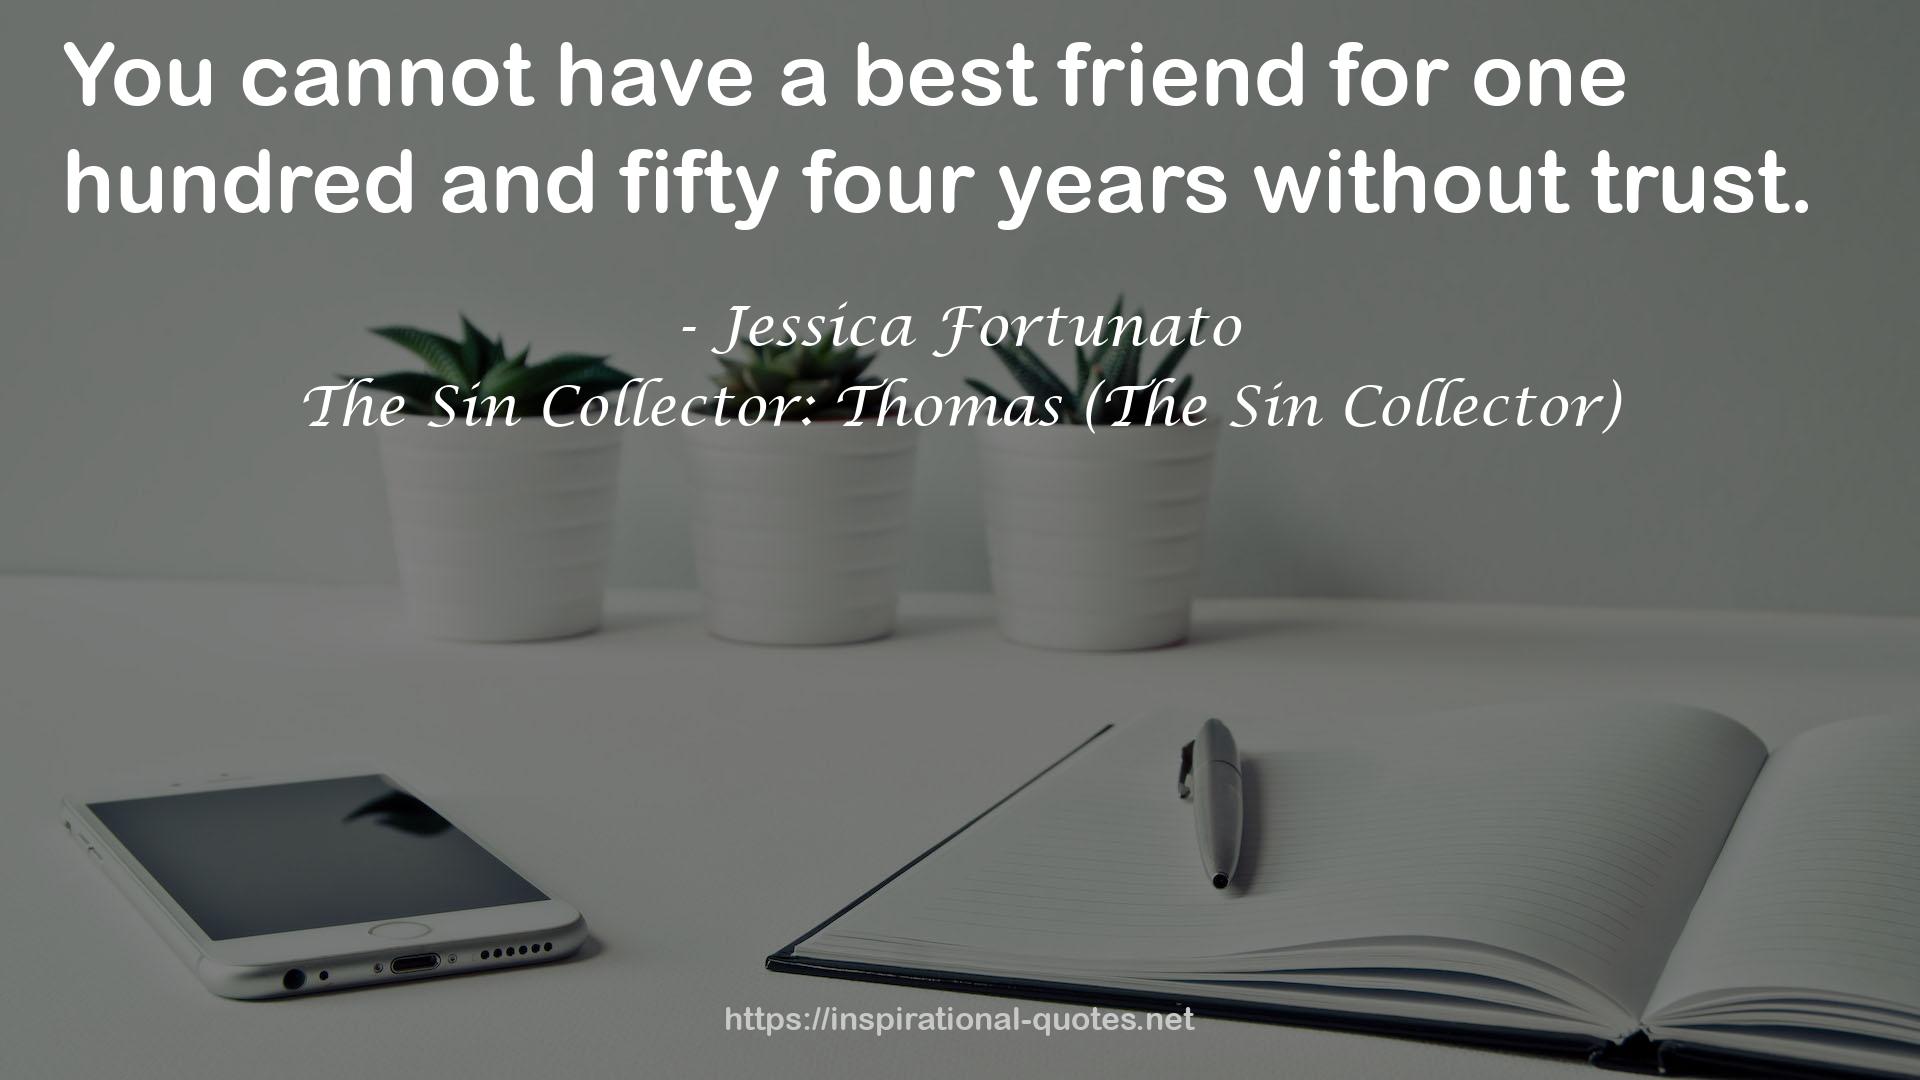 The Sin Collector: Thomas (The Sin Collector) QUOTES